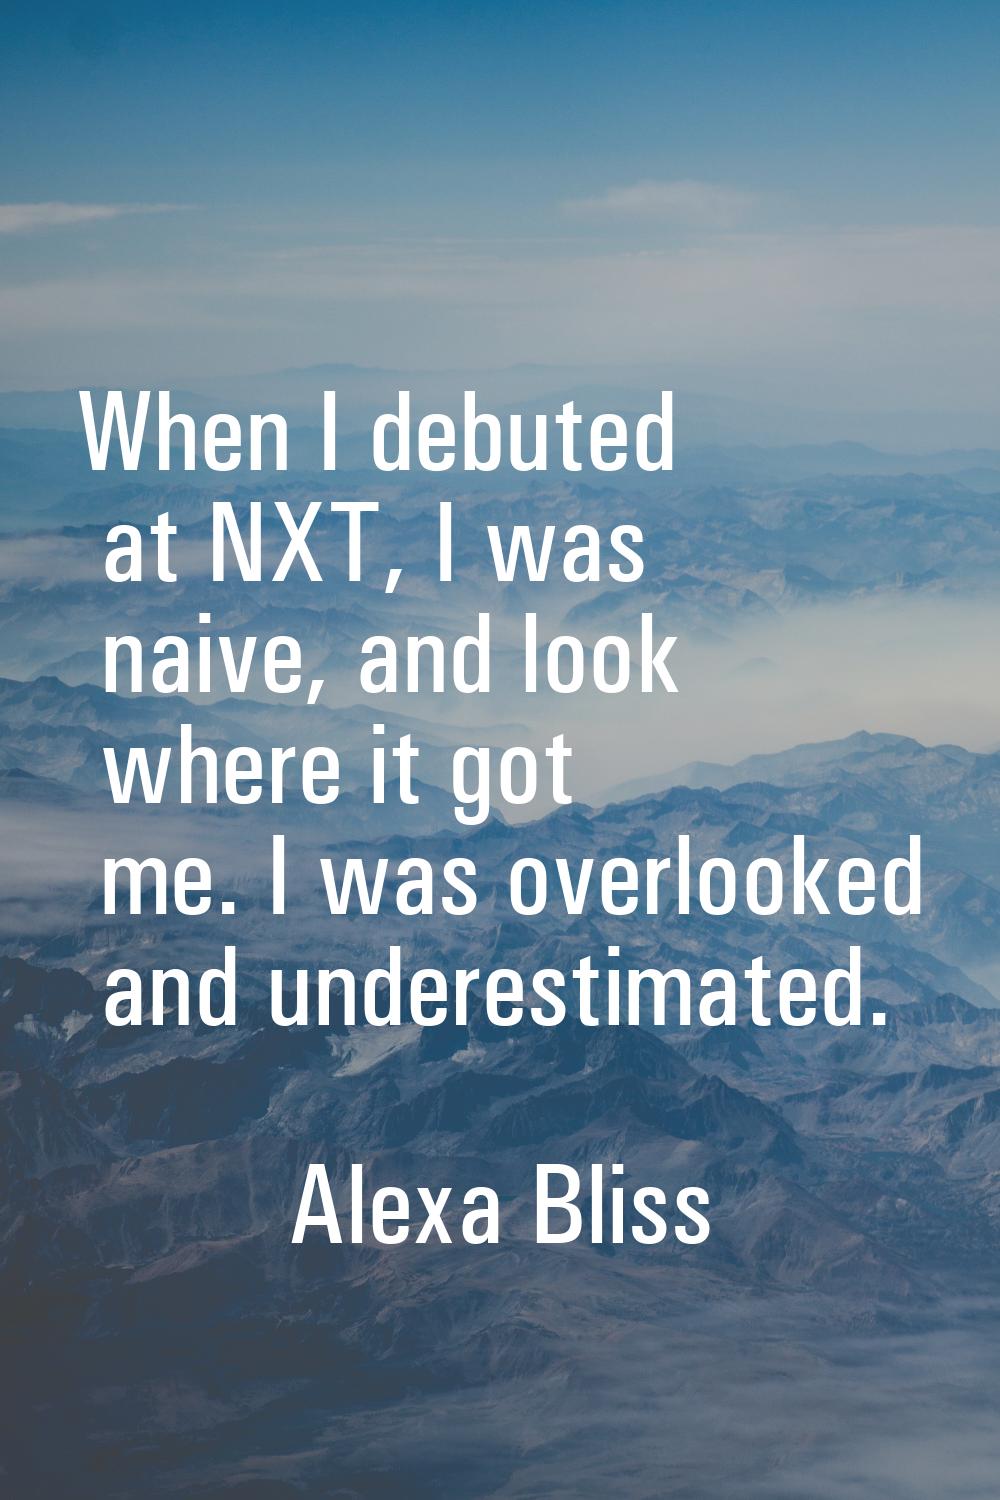 When I debuted at NXT, I was naive, and look where it got me. I was overlooked and underestimated.